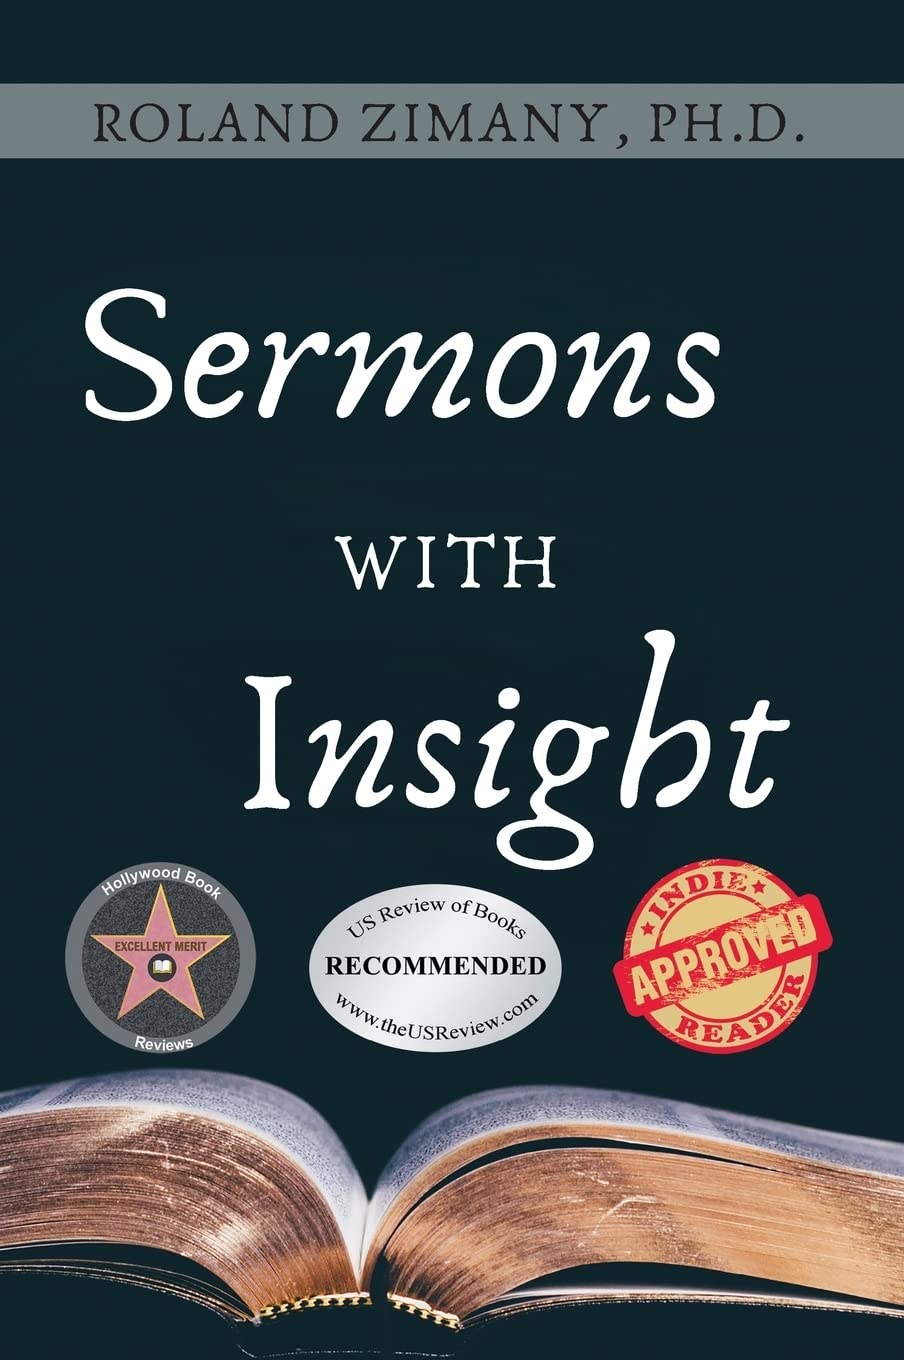 Sermons with Insight